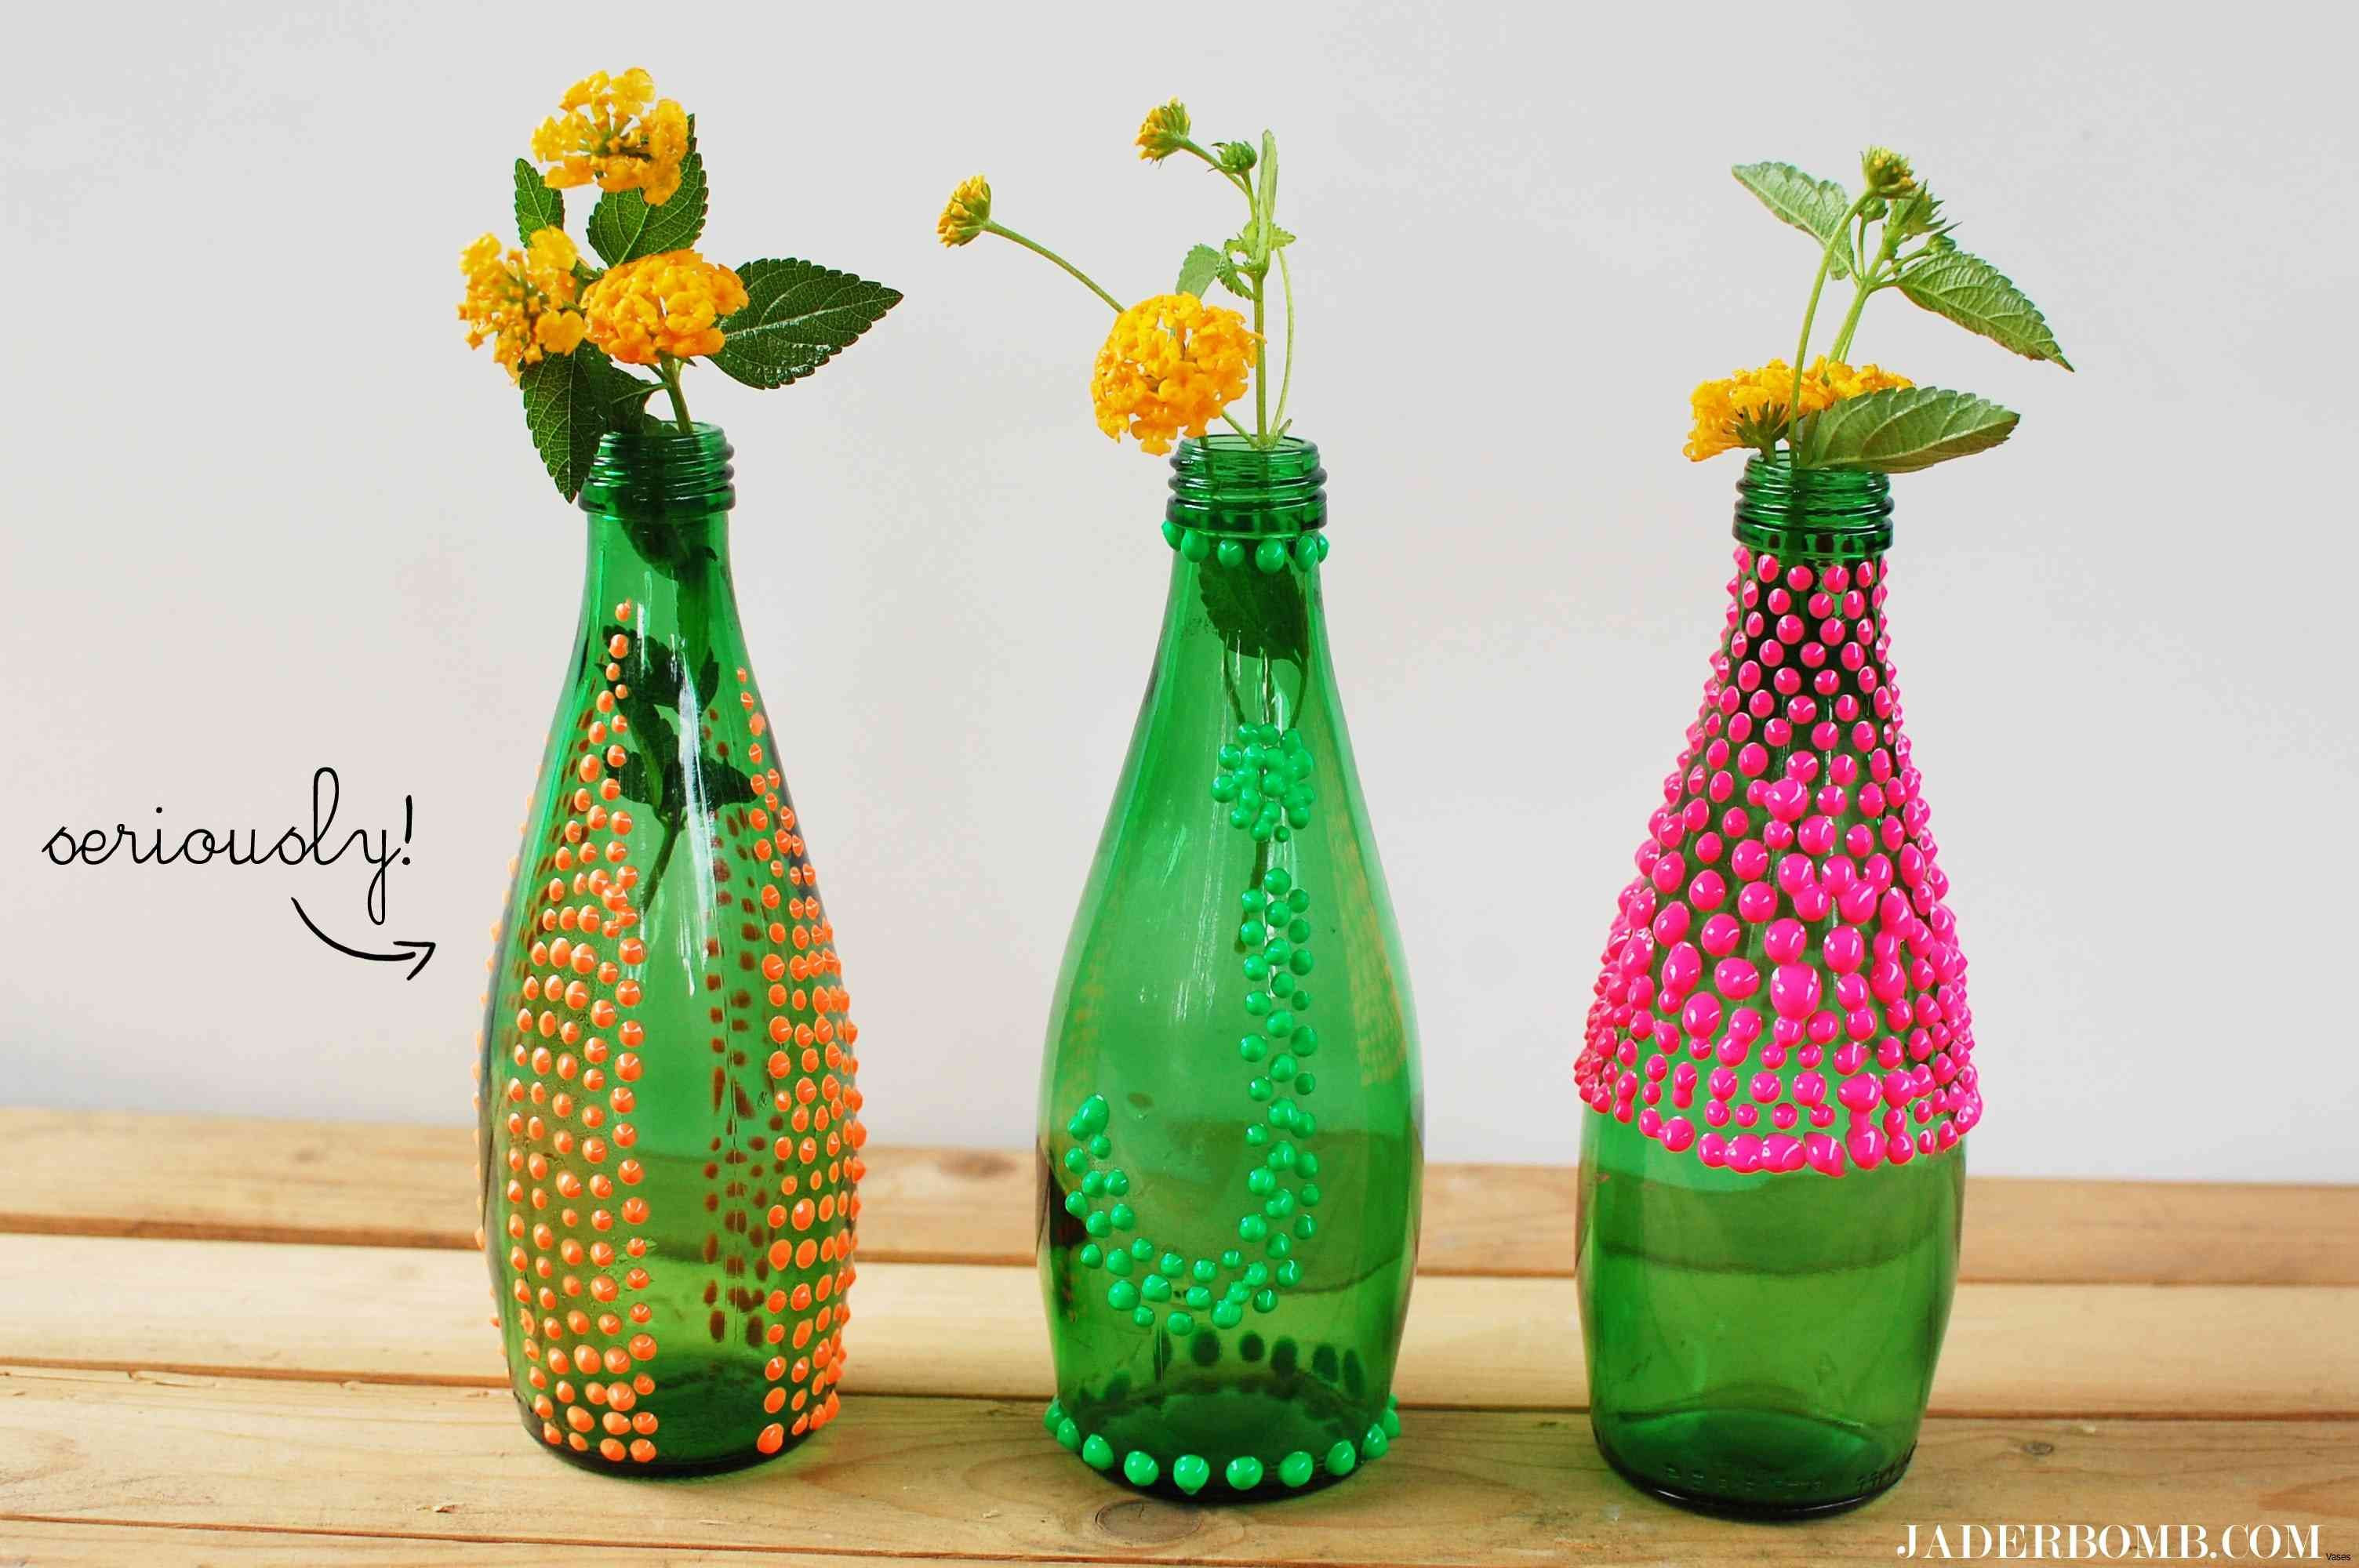 18 attractive Small Antique Glass Vases 2024 free download small antique glass vases of 35 antique green glass vases the weekly world with regard to 39 elegant big flower vase